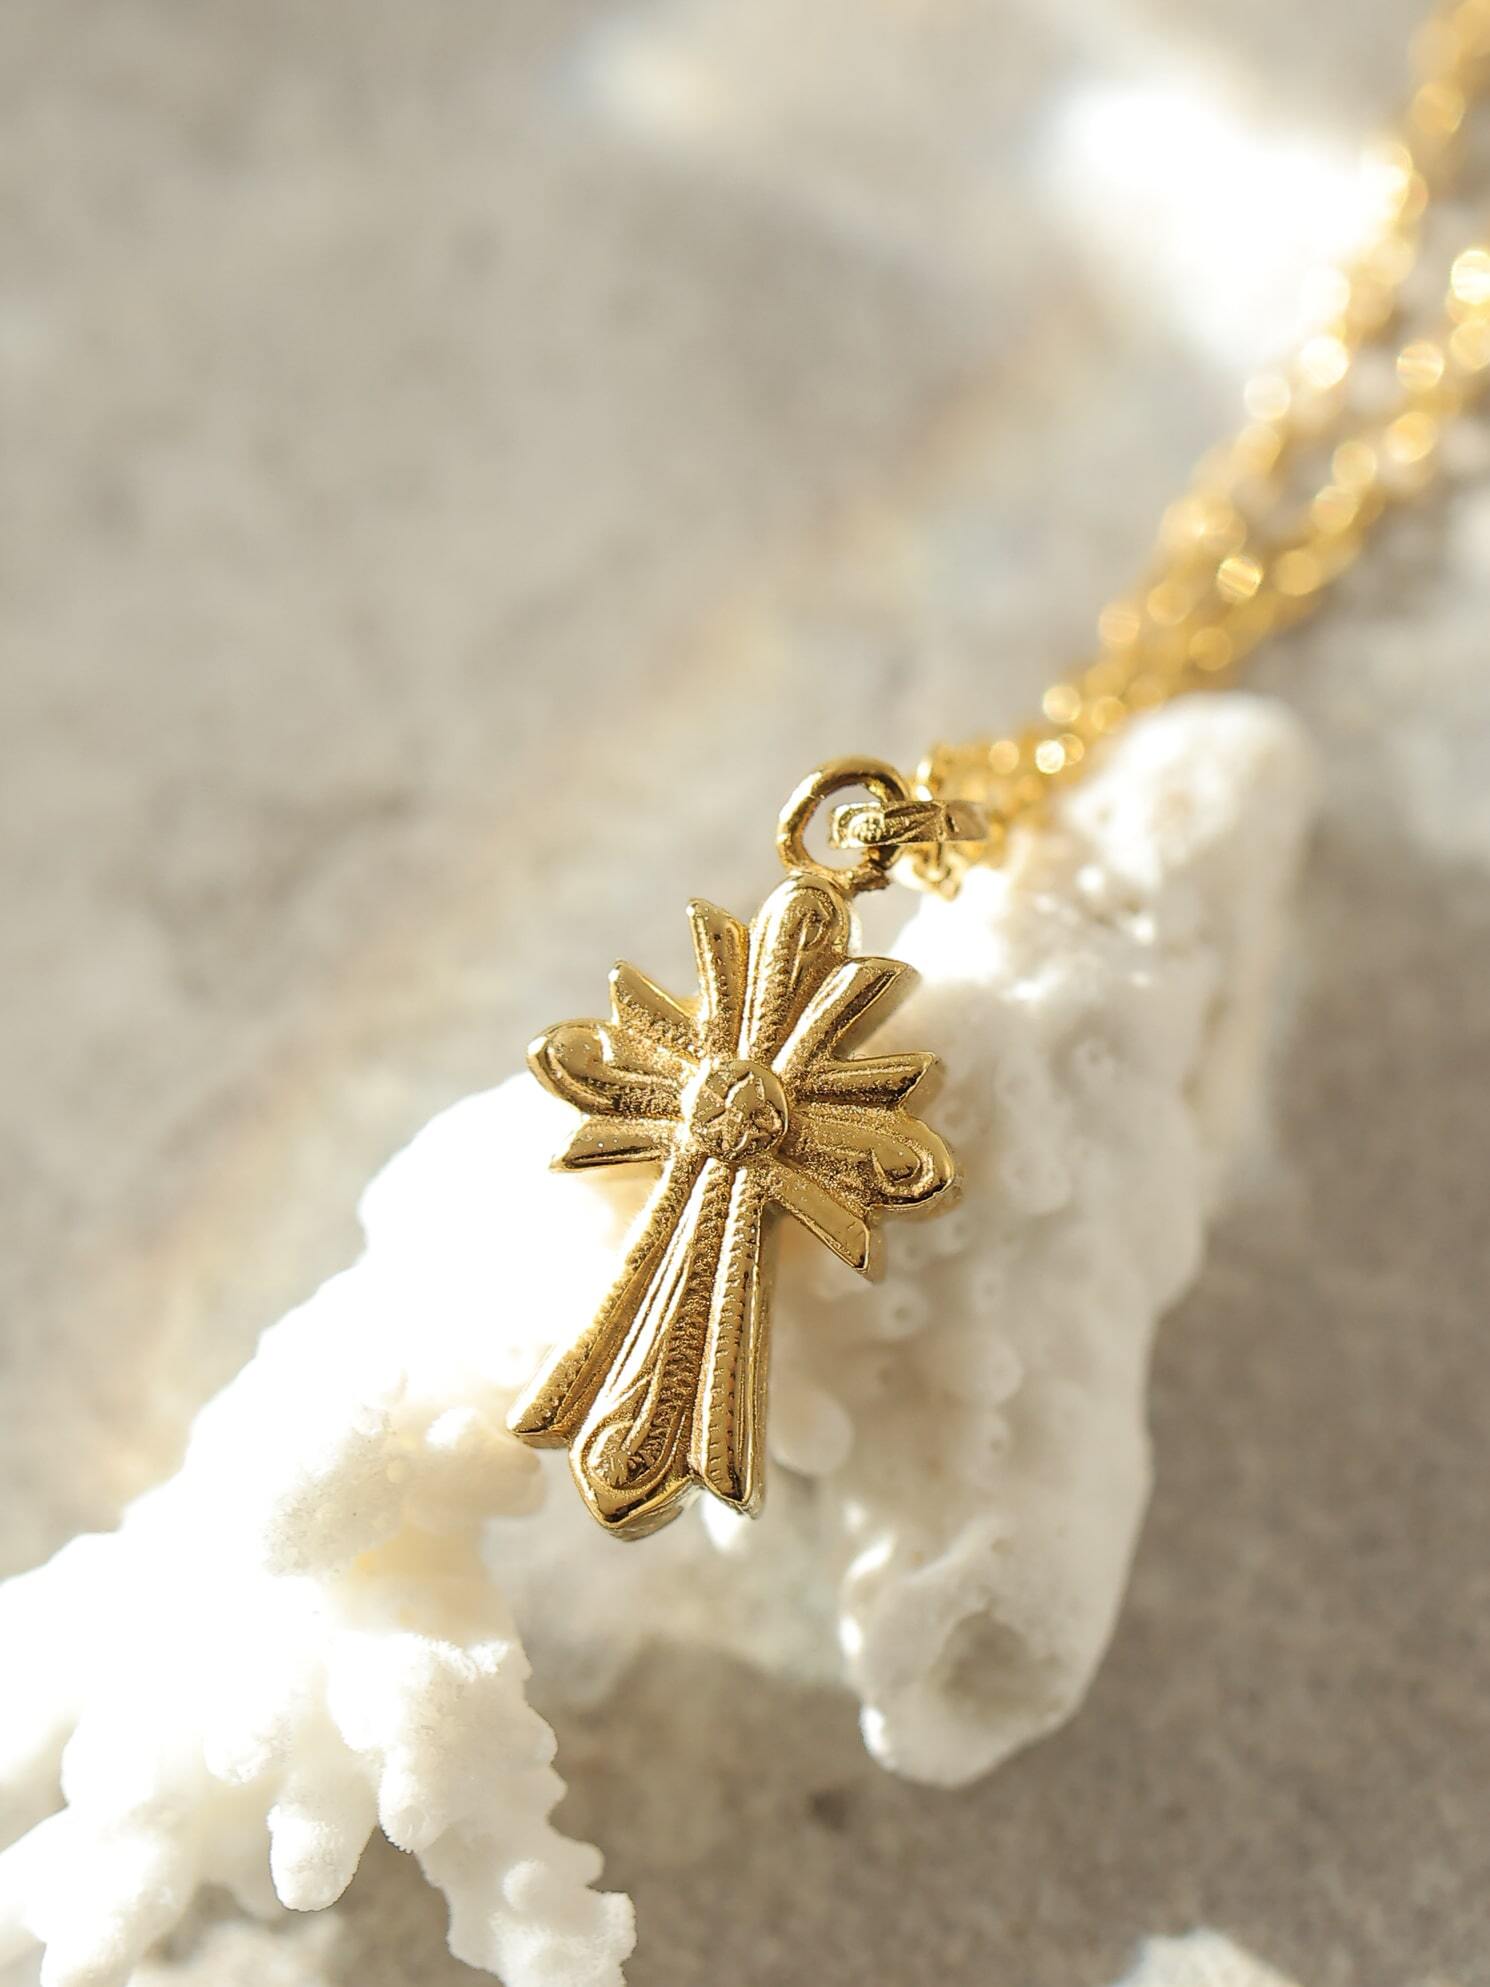 Buy Men's Necklace, 14K Gold Cross Pendant for Men, Thick Gold Cross Chain  Men's Jewelry Online in India - Etsy